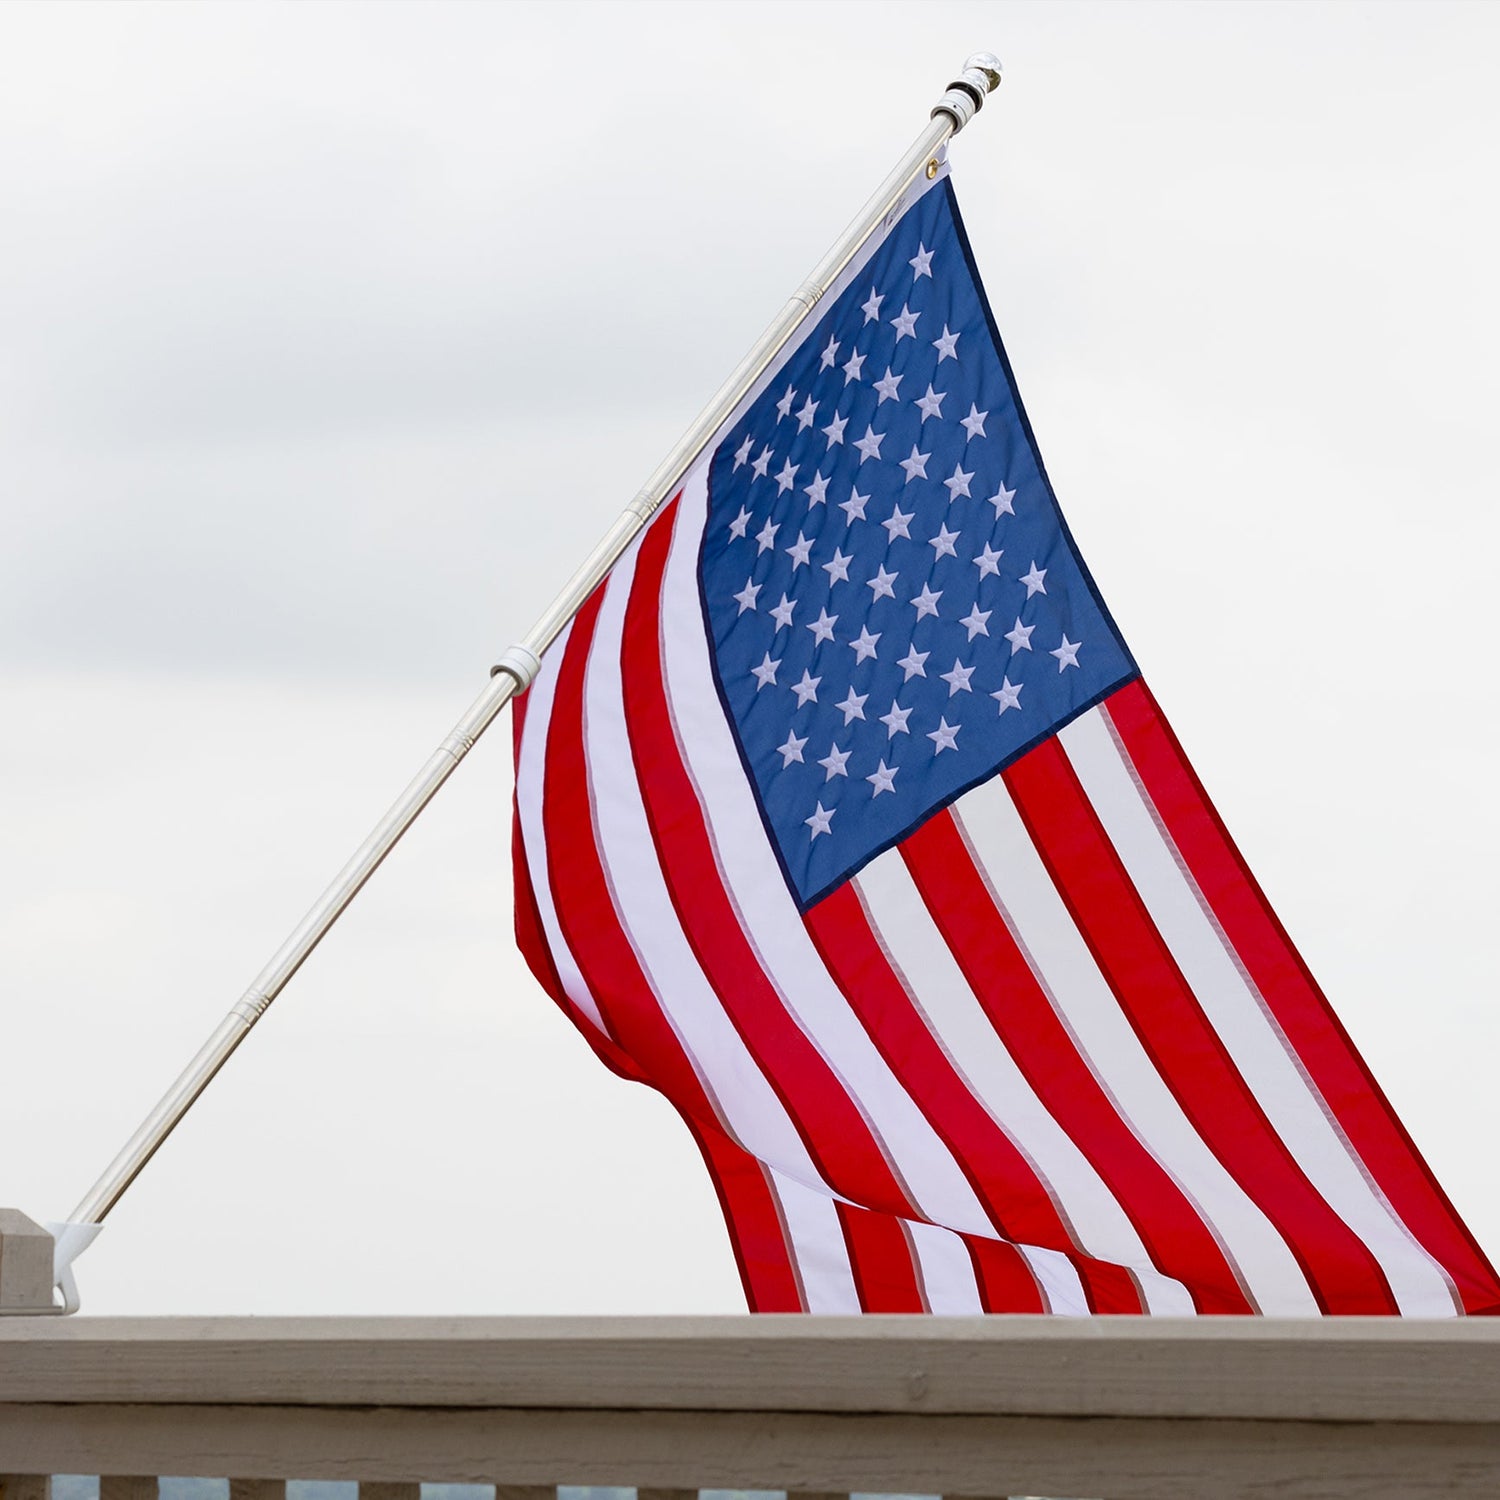 An American flag, hand made with precision and care, is displayed on a pole against a cloudy sky backdrop.